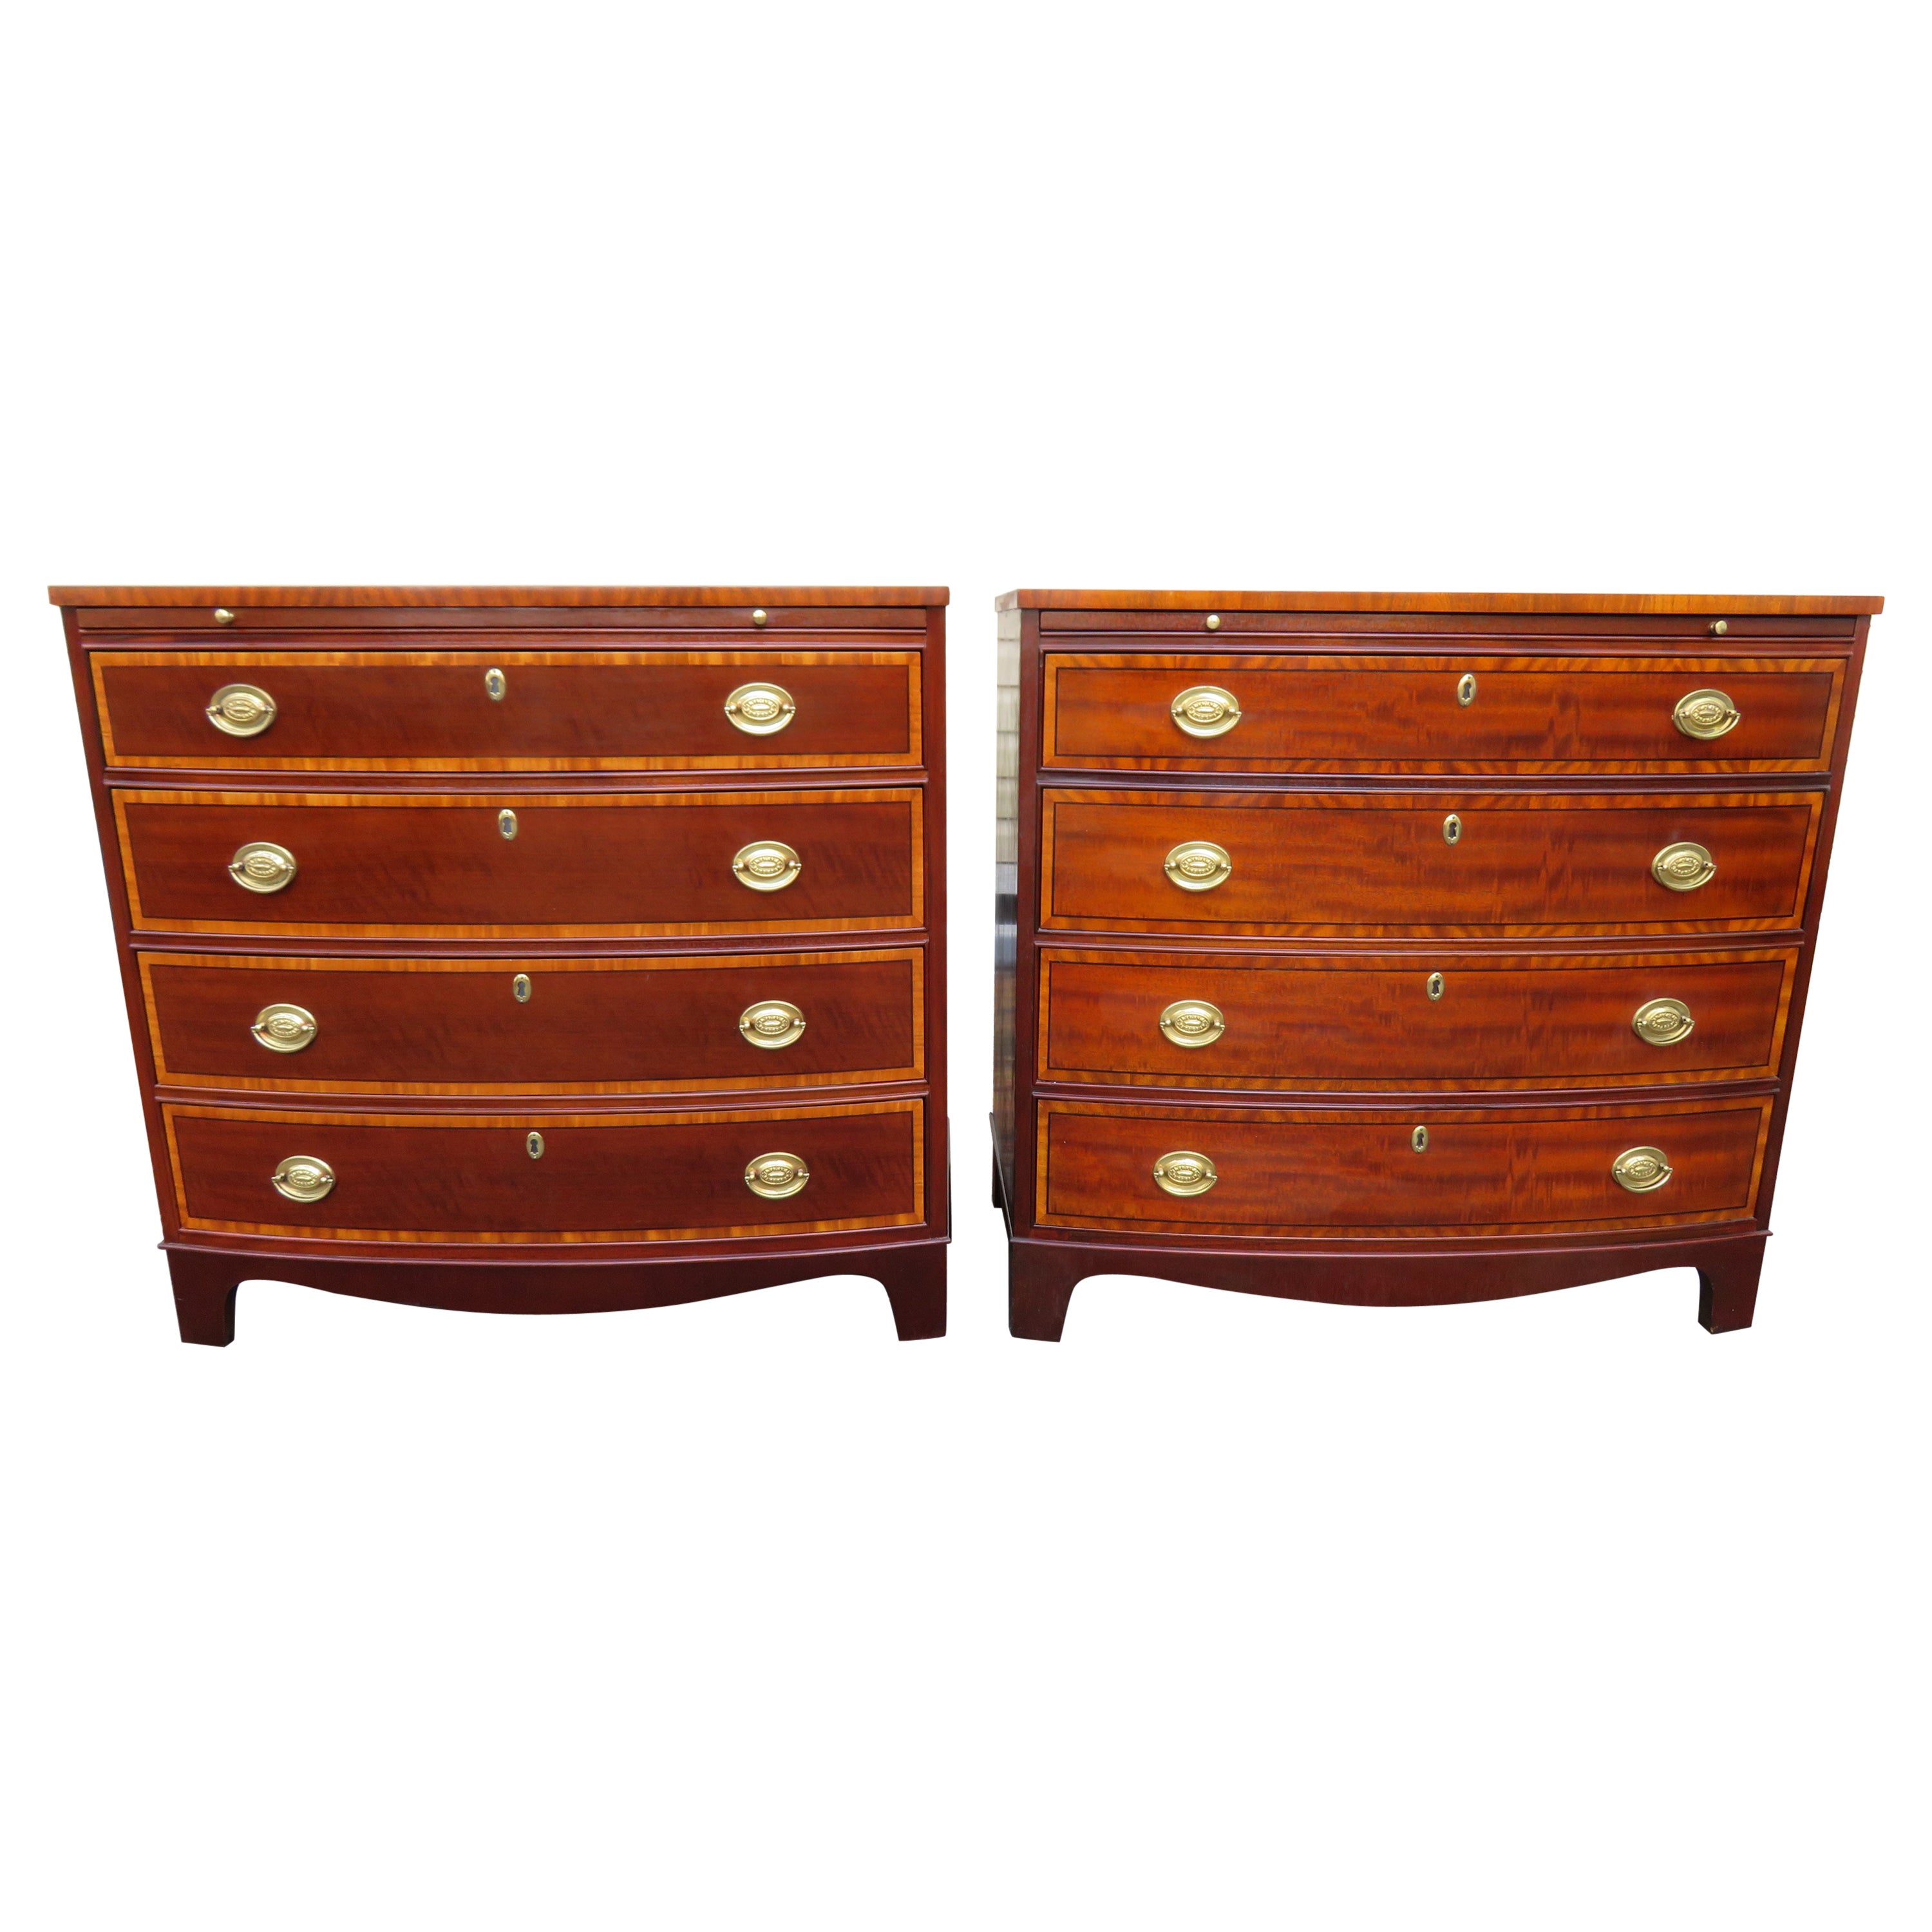 Stunning Pair Baker Furniture Hepplewhite Mahogany Bow Front Bachelors Chests For Sale